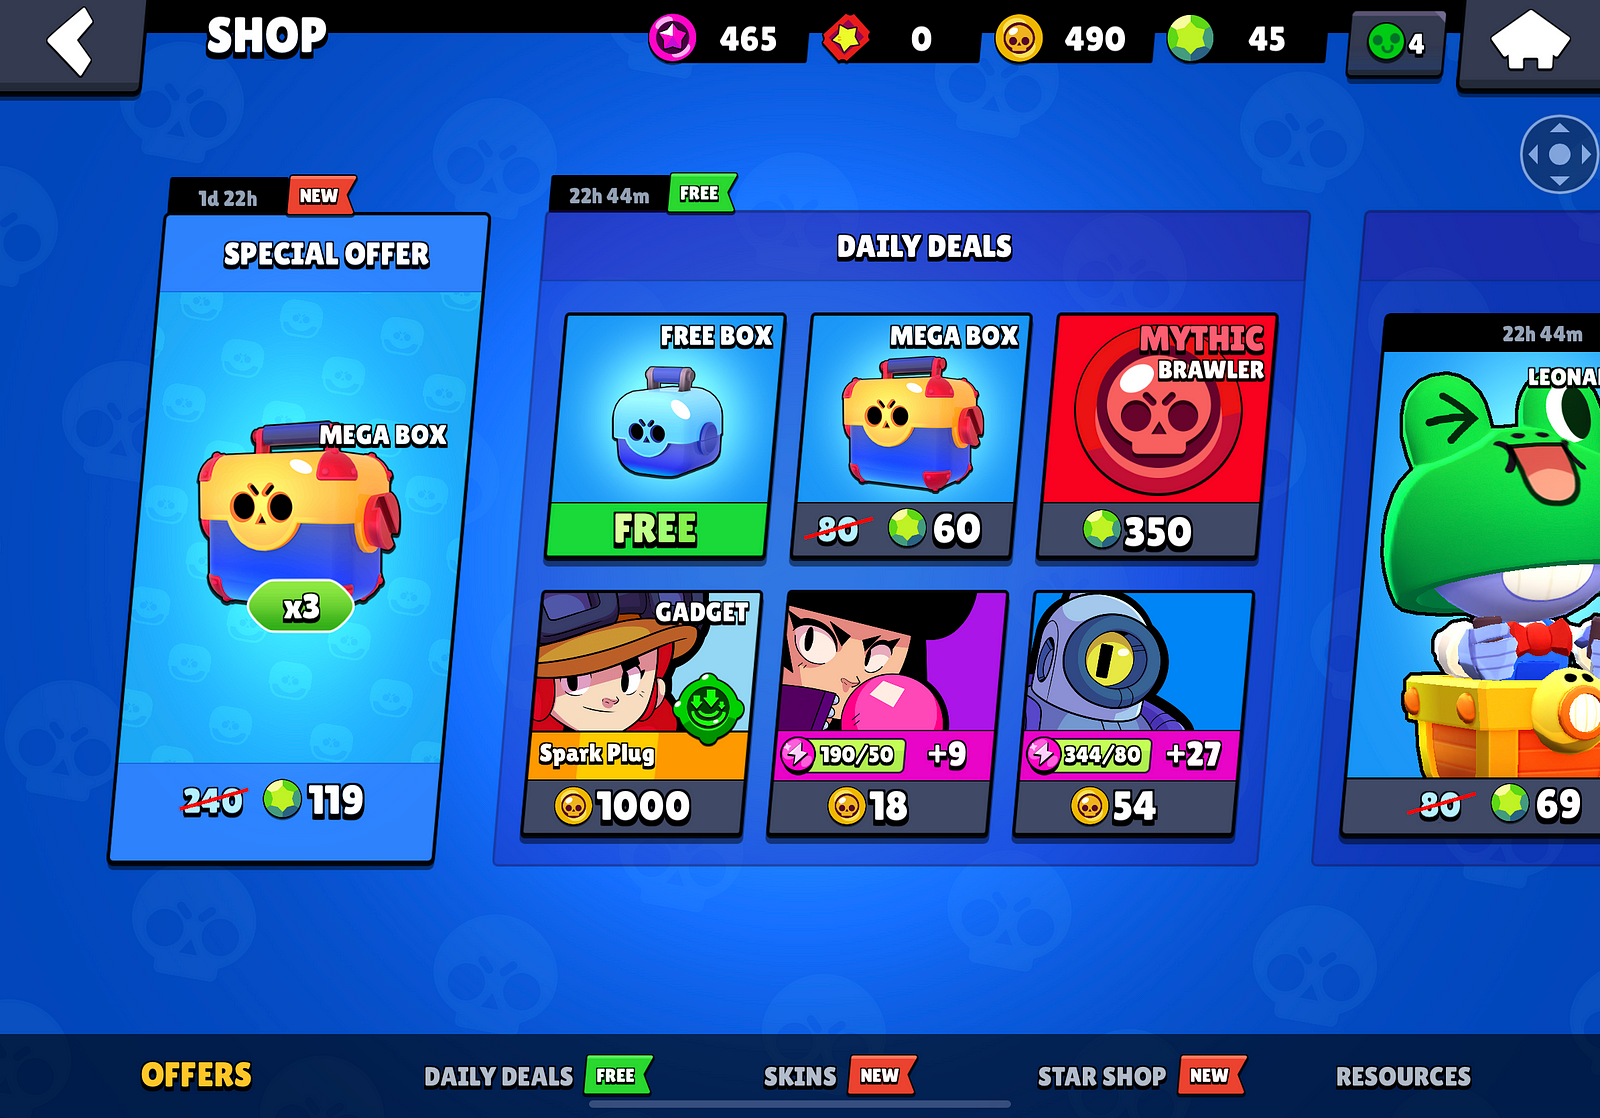 2ndpotion Level Up 3 - brawl stars mythic brawlers special offer